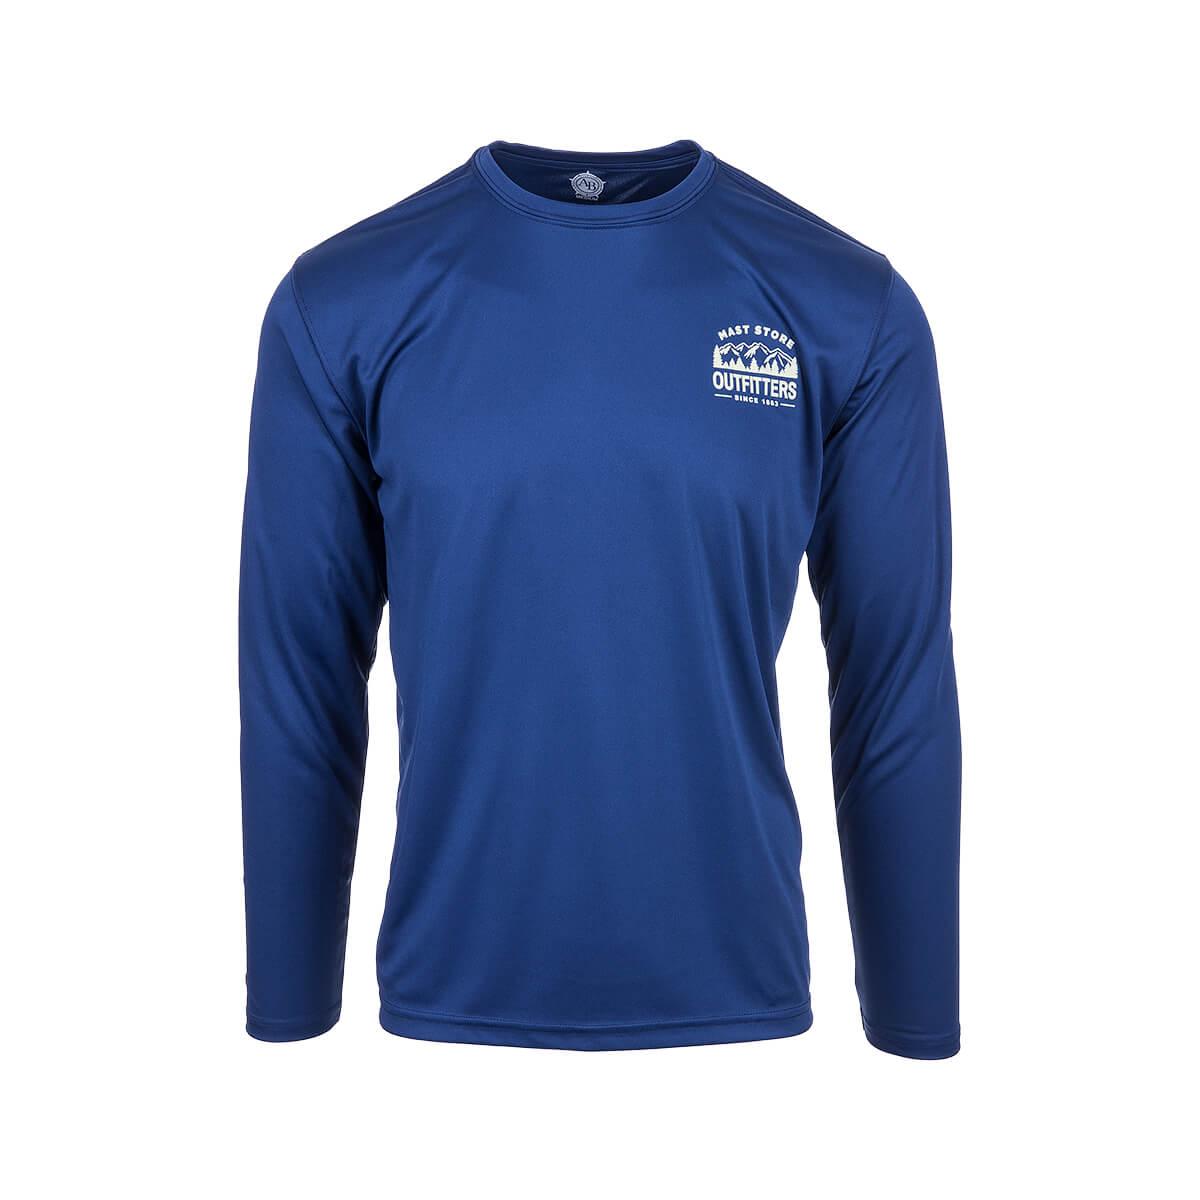  Mast Store Outfitters Solar Long Sleeve Wicking T- Shirt